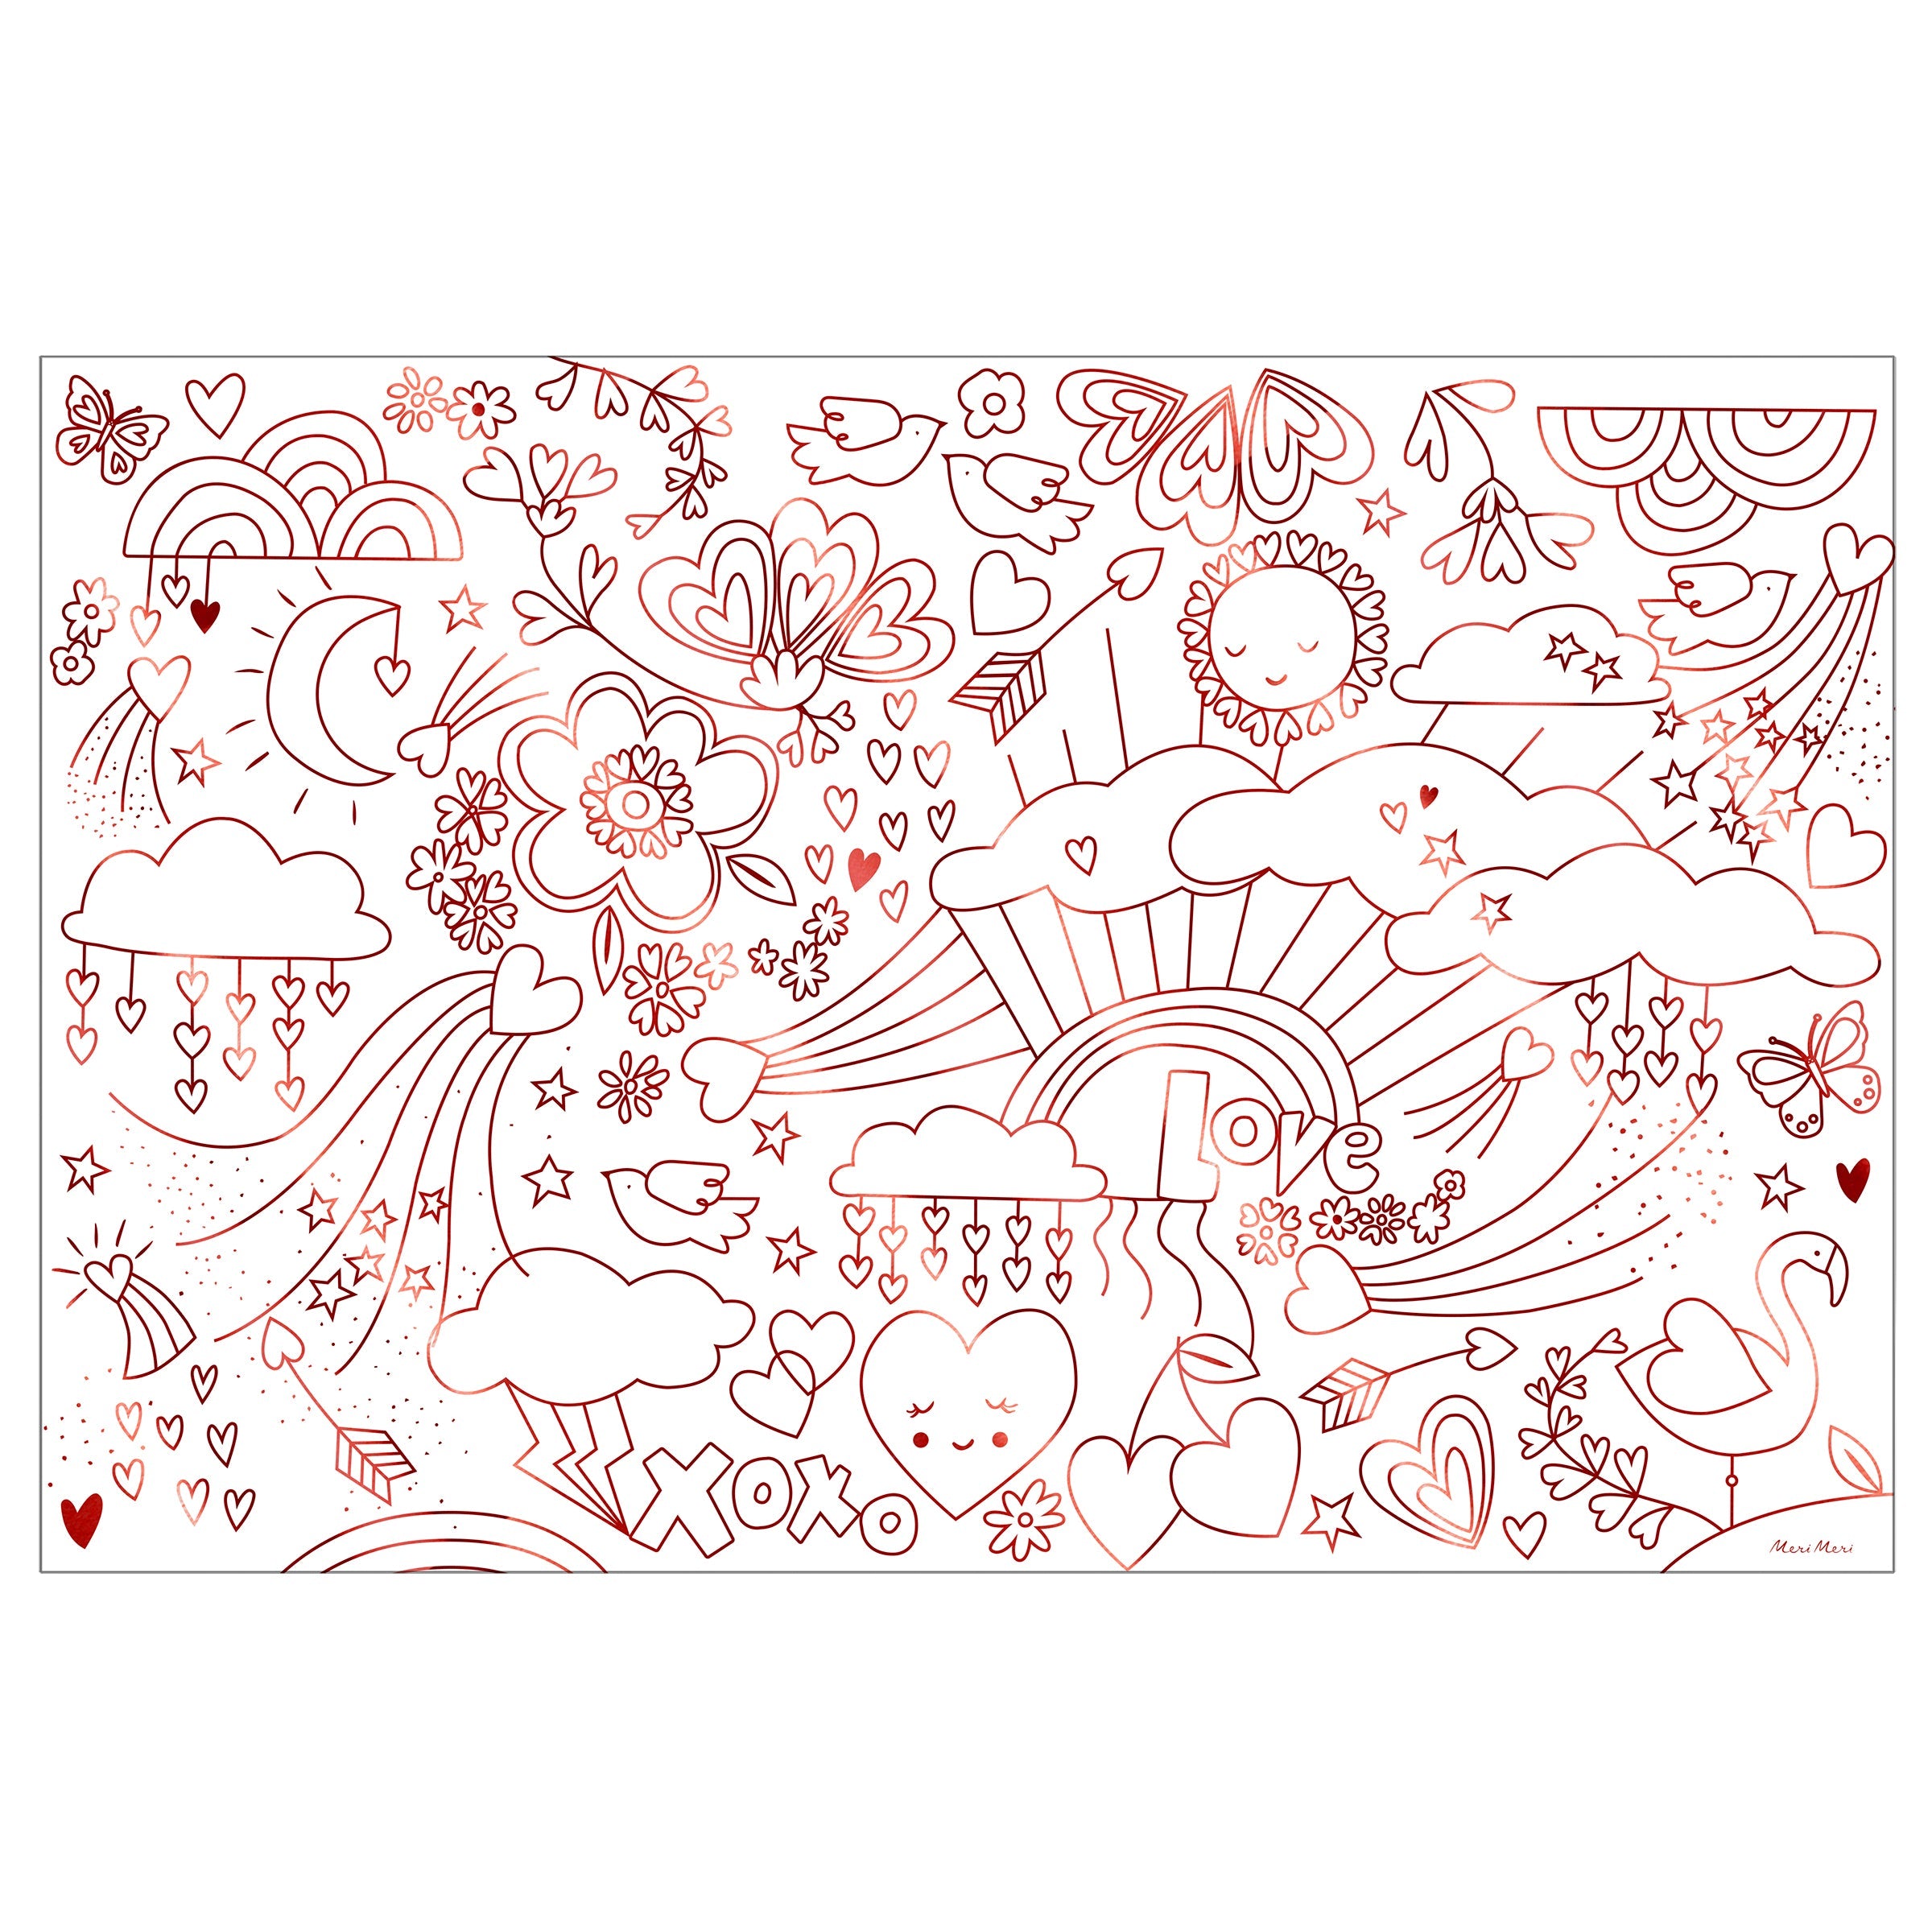 Valentine Colouring Posters